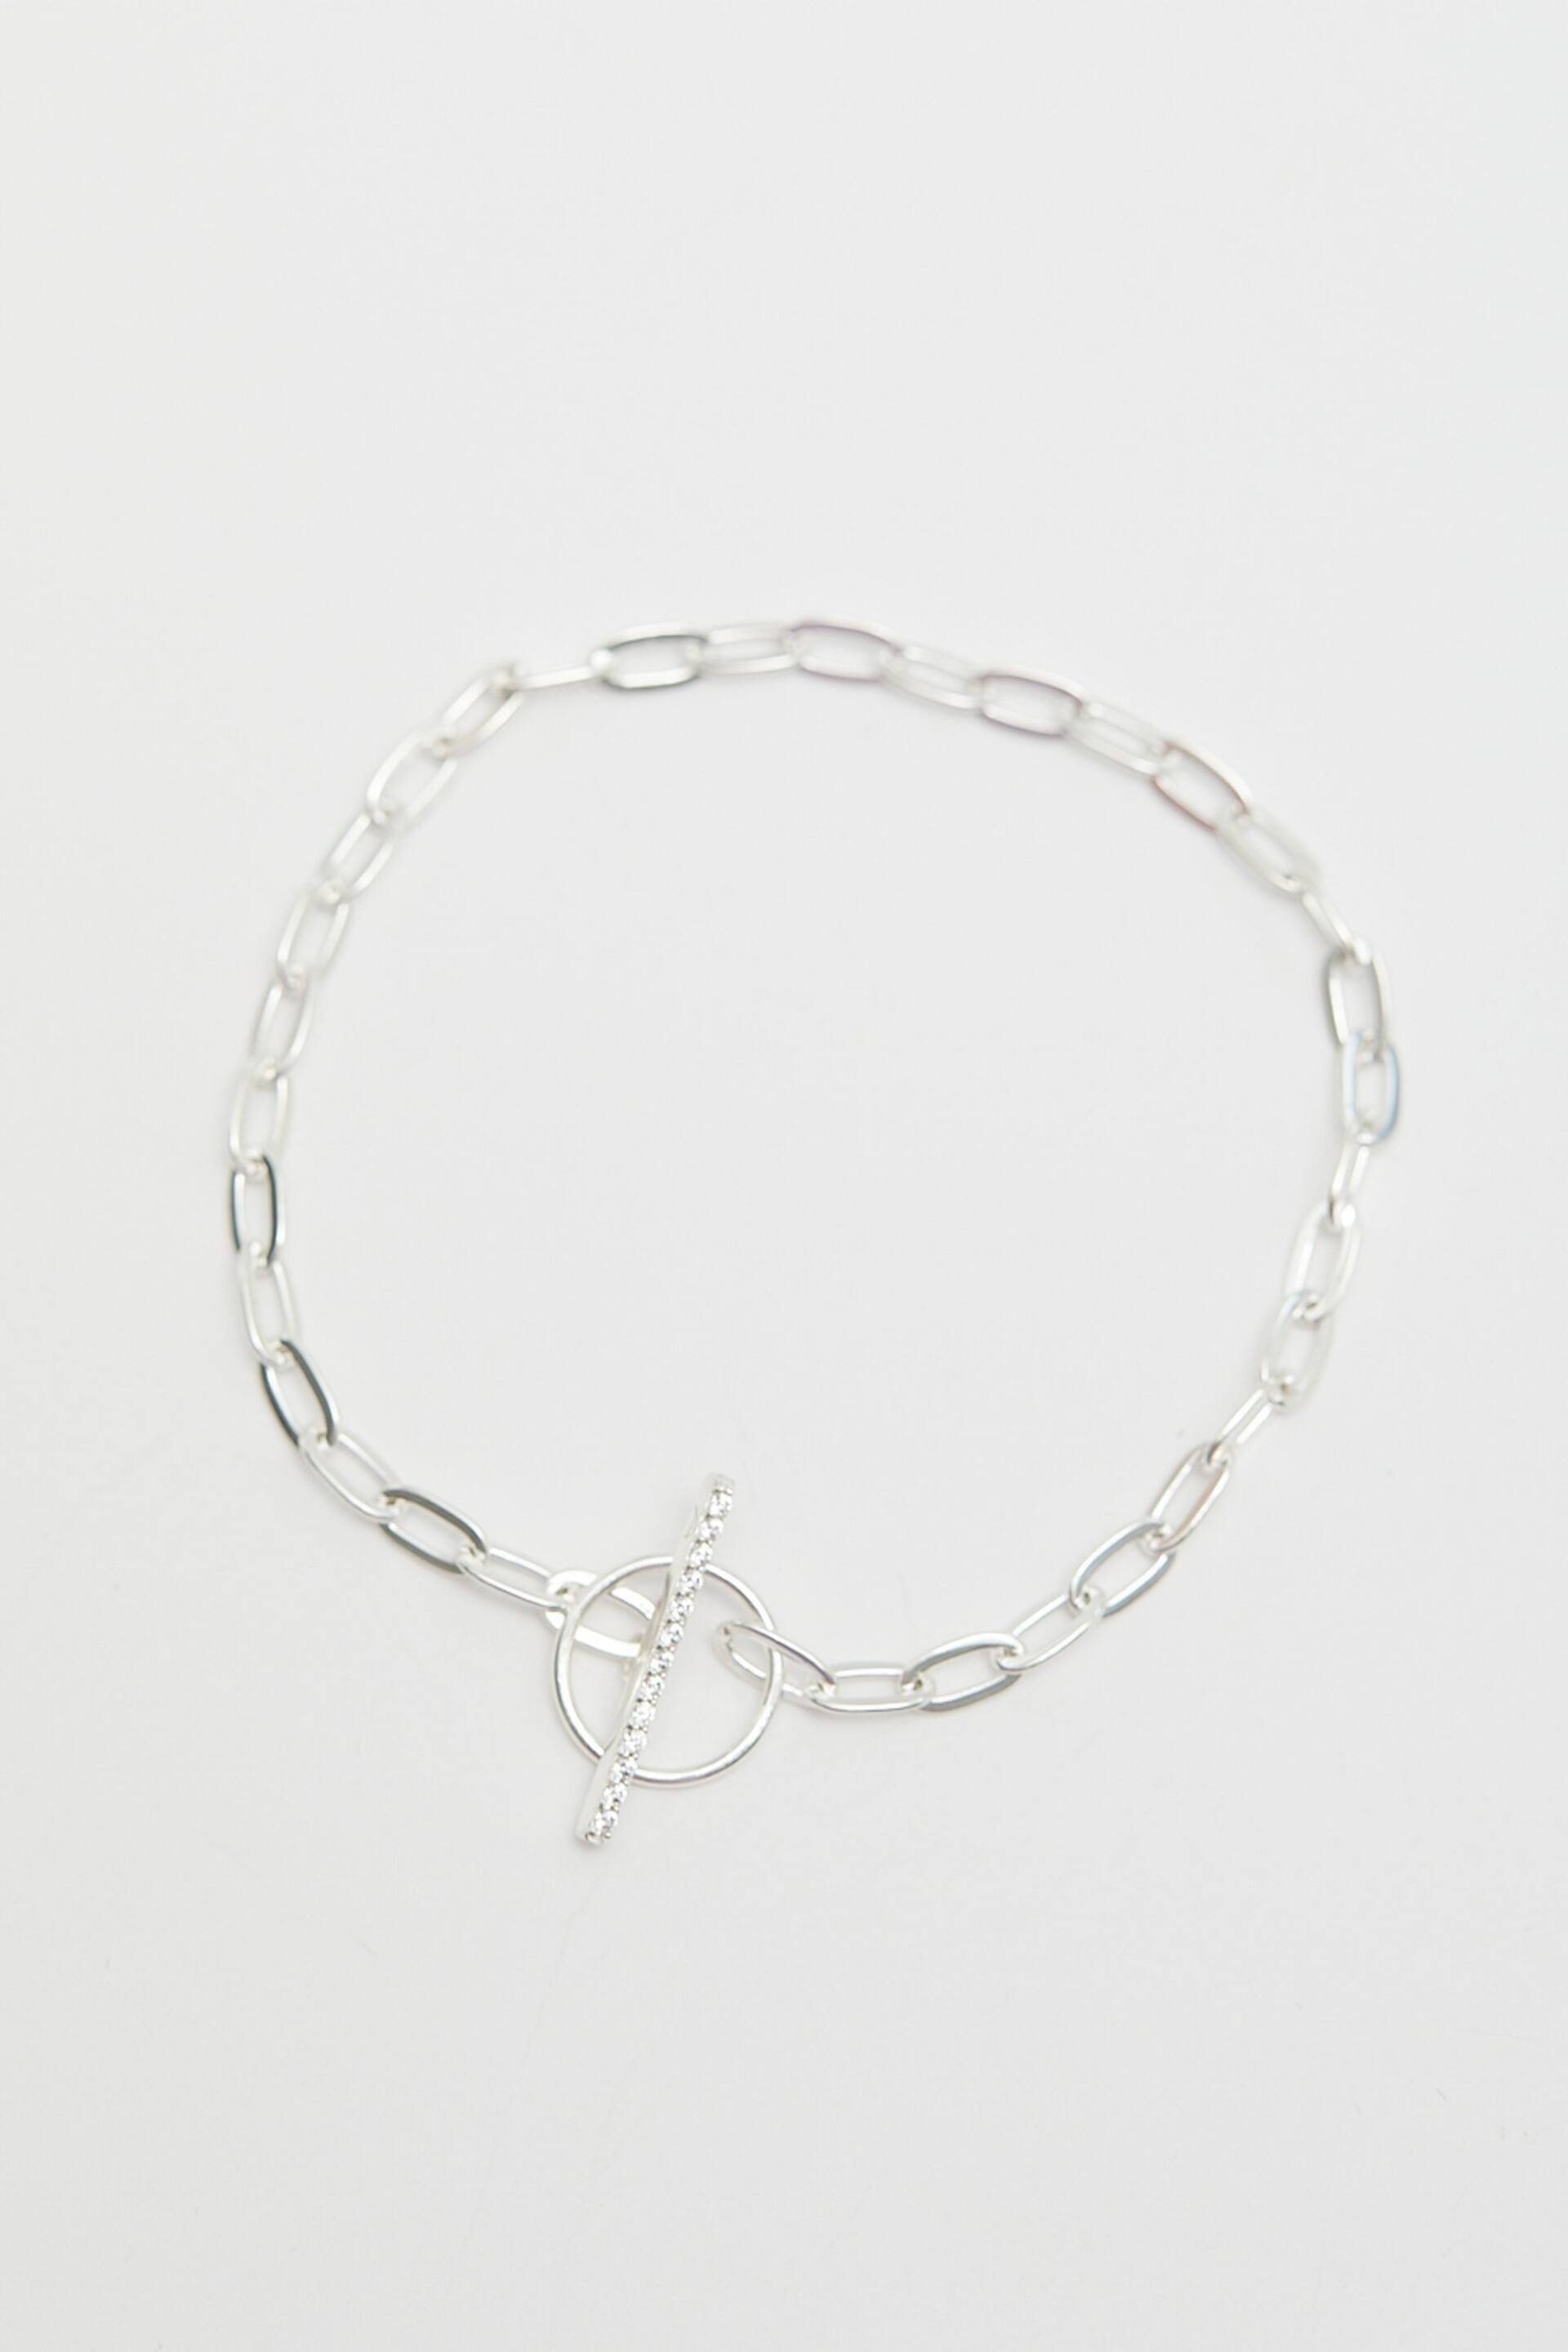 Simply Silver Silver Tone Polished And Pave T-Bar Bracelet - Image 4 of 4